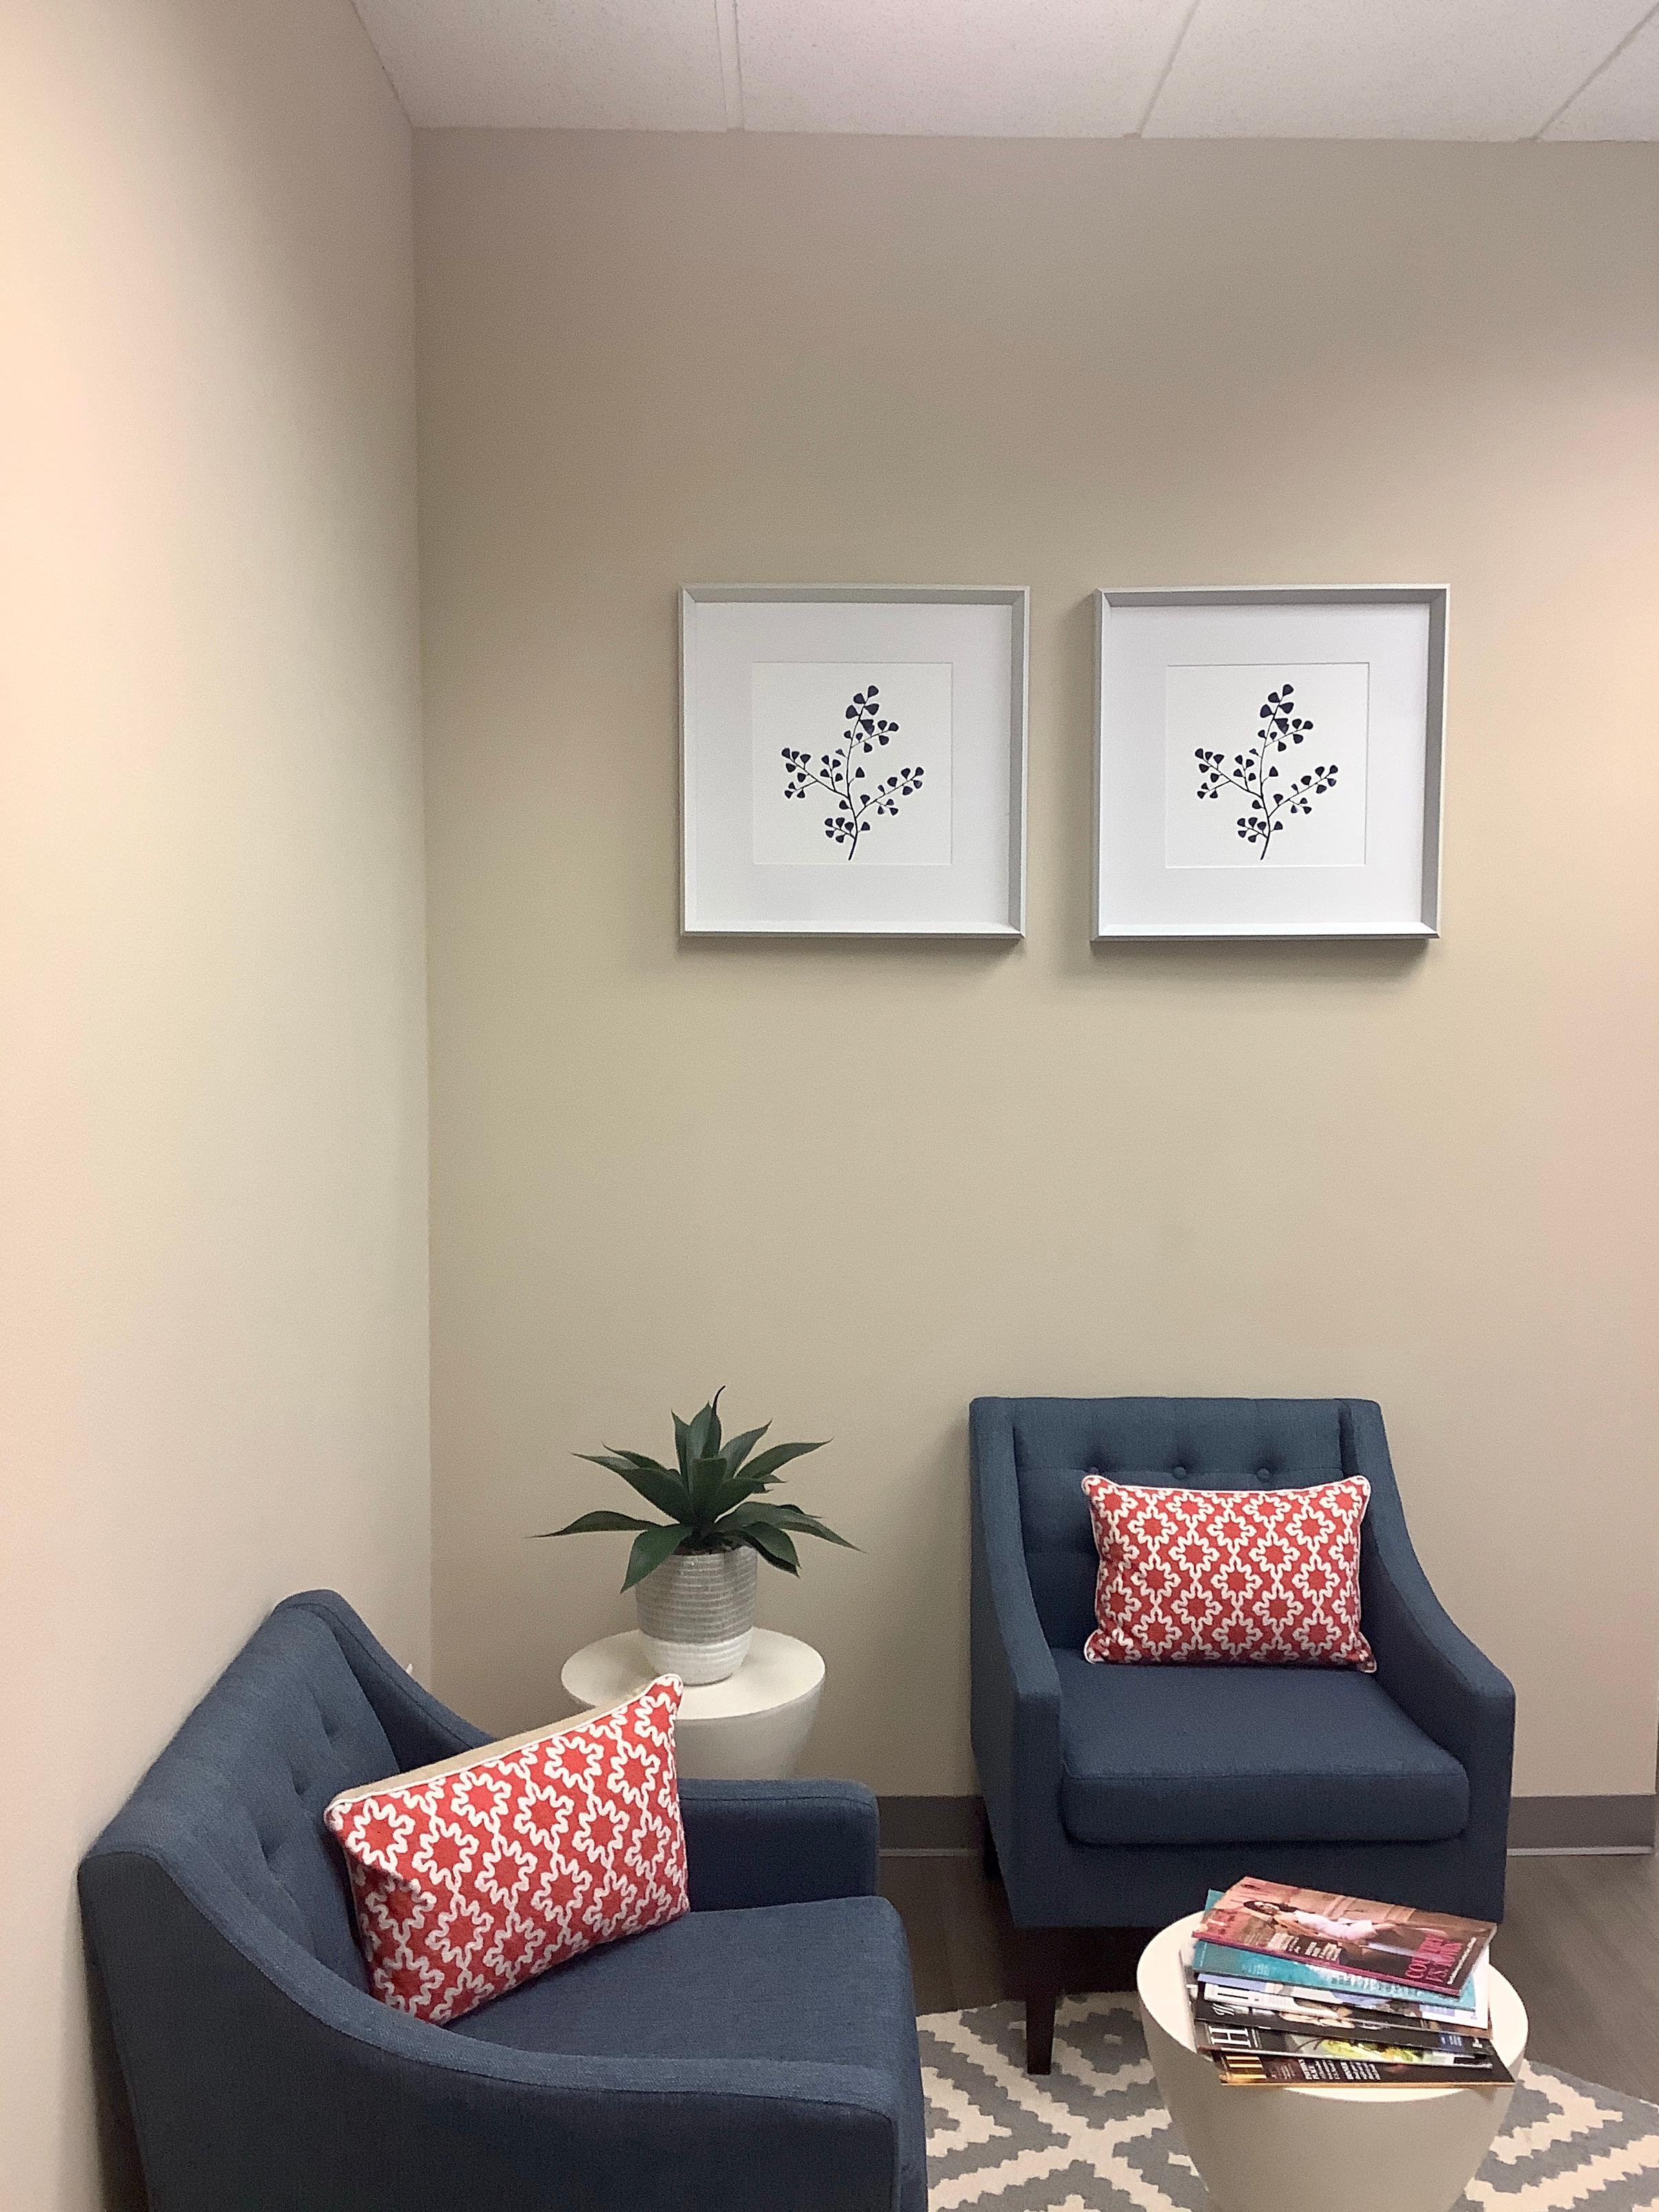 Mindful TMS Neurocare Centers Photo